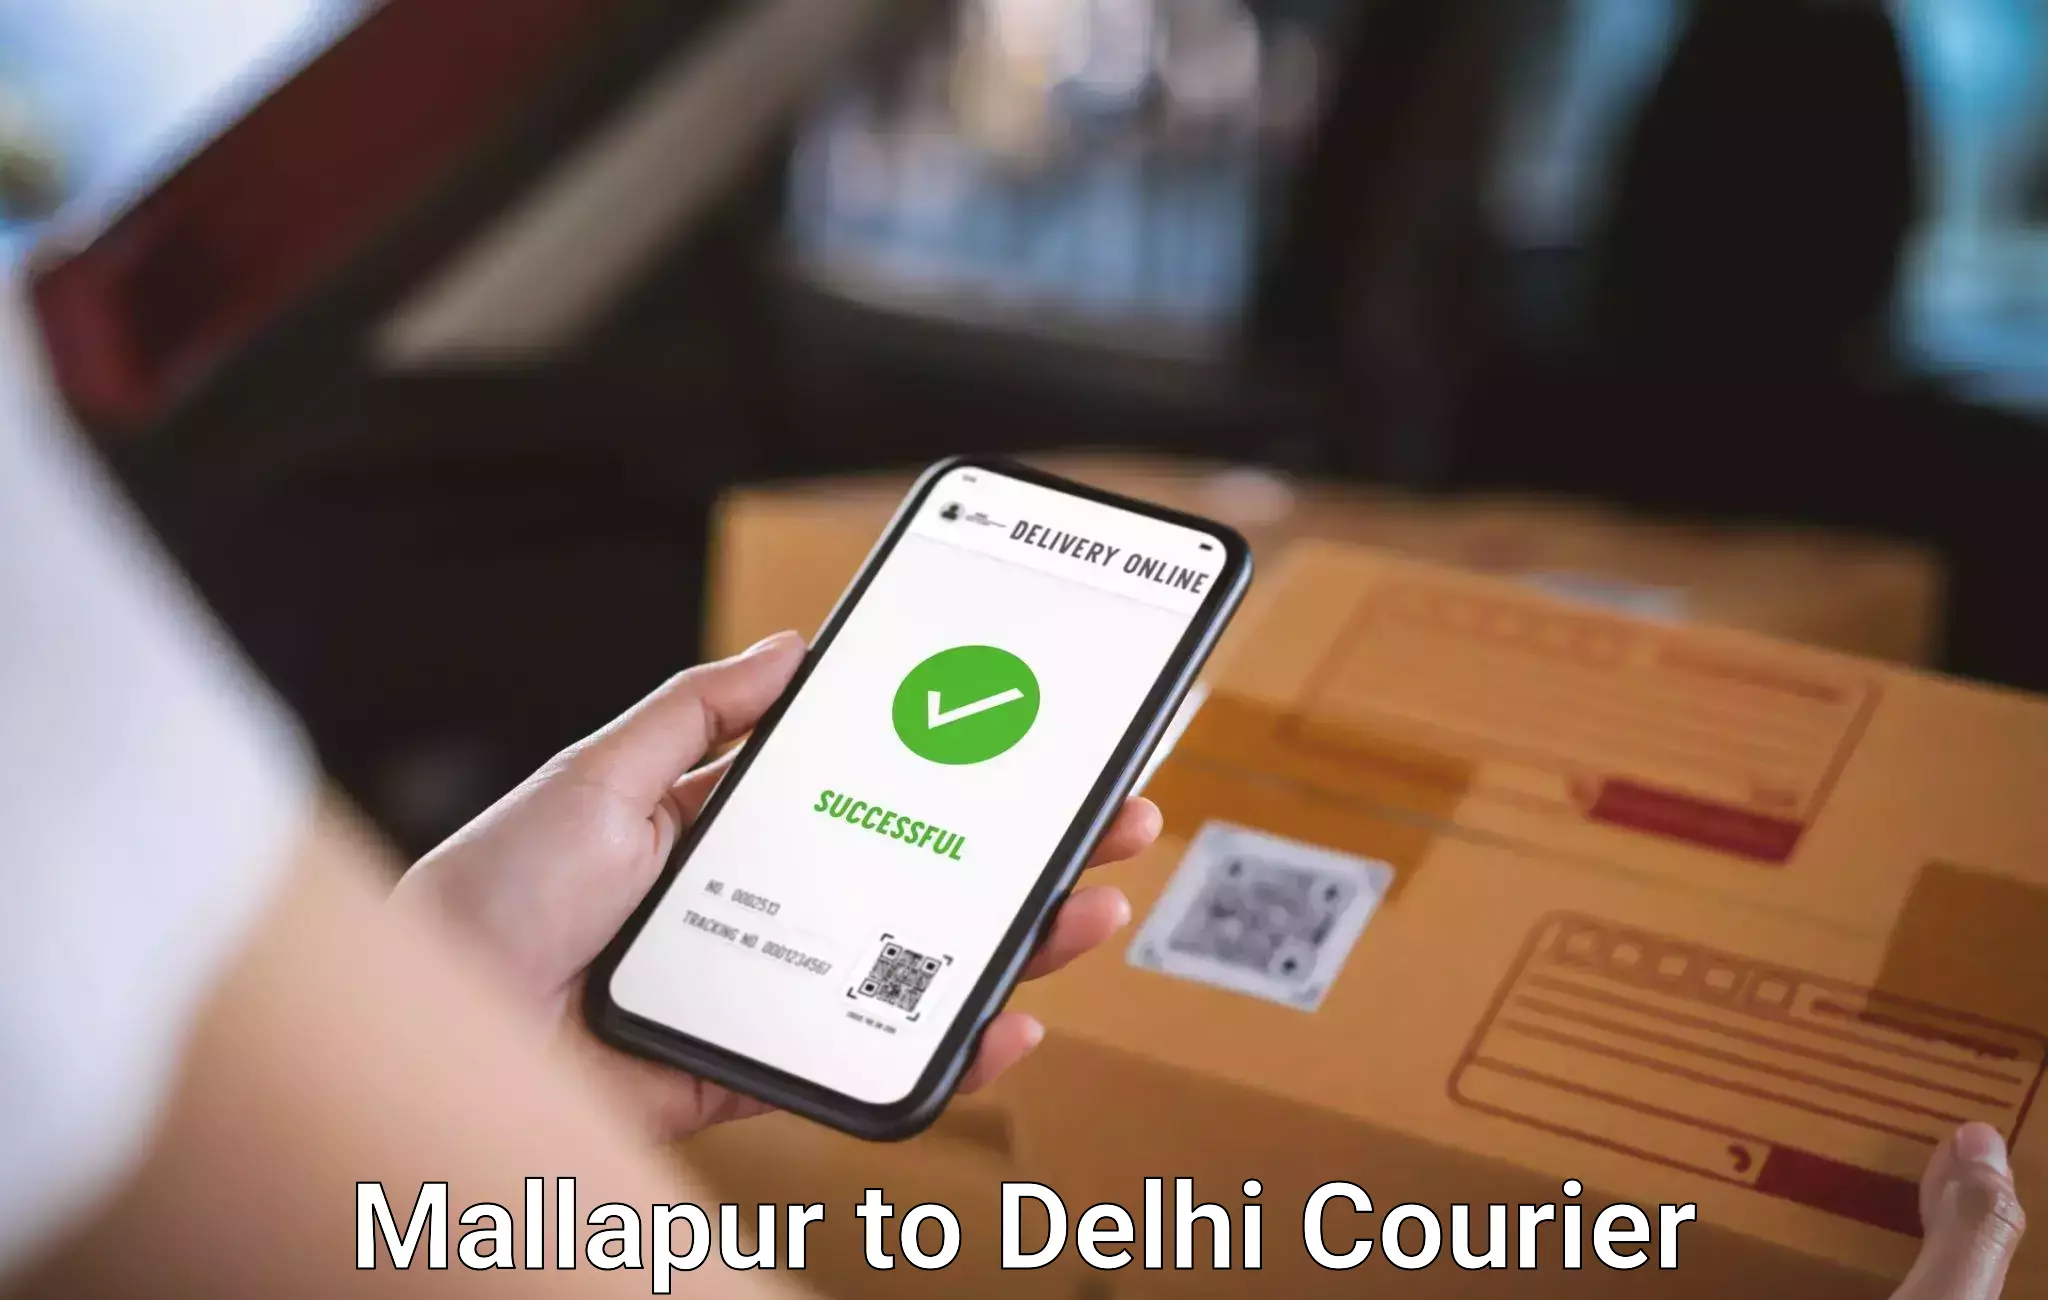 Luggage delivery network Mallapur to Lodhi Road